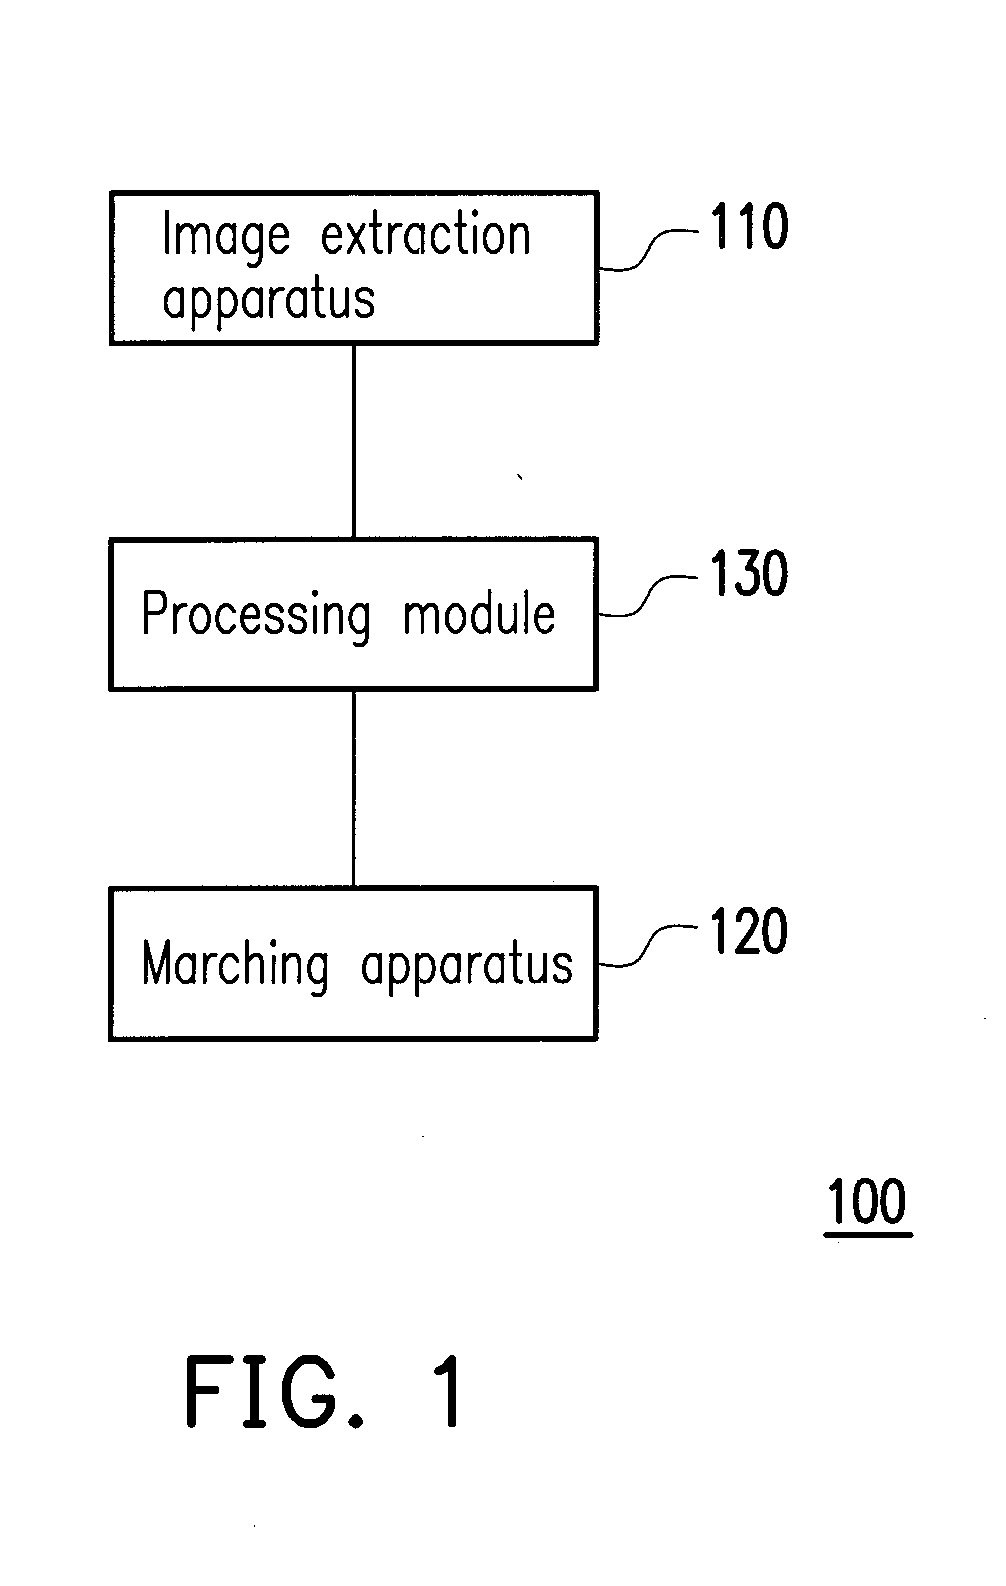 Robot and method for recognizing human faces and gestures thereof